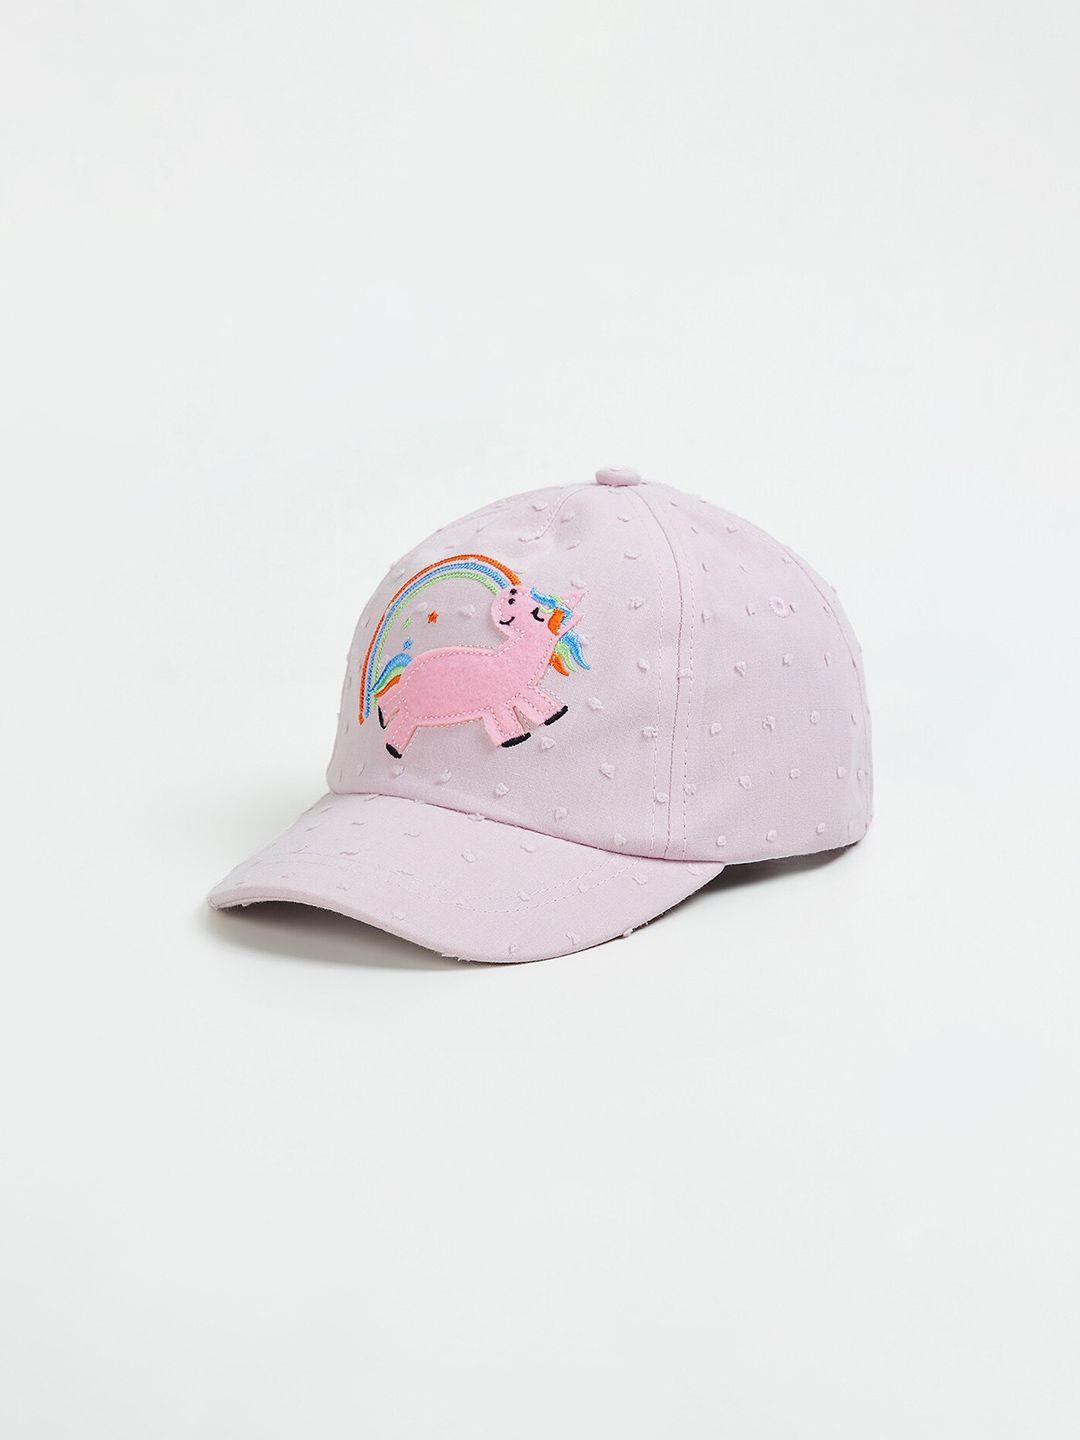 max Girls Embroidered Cotton Baseball Cap